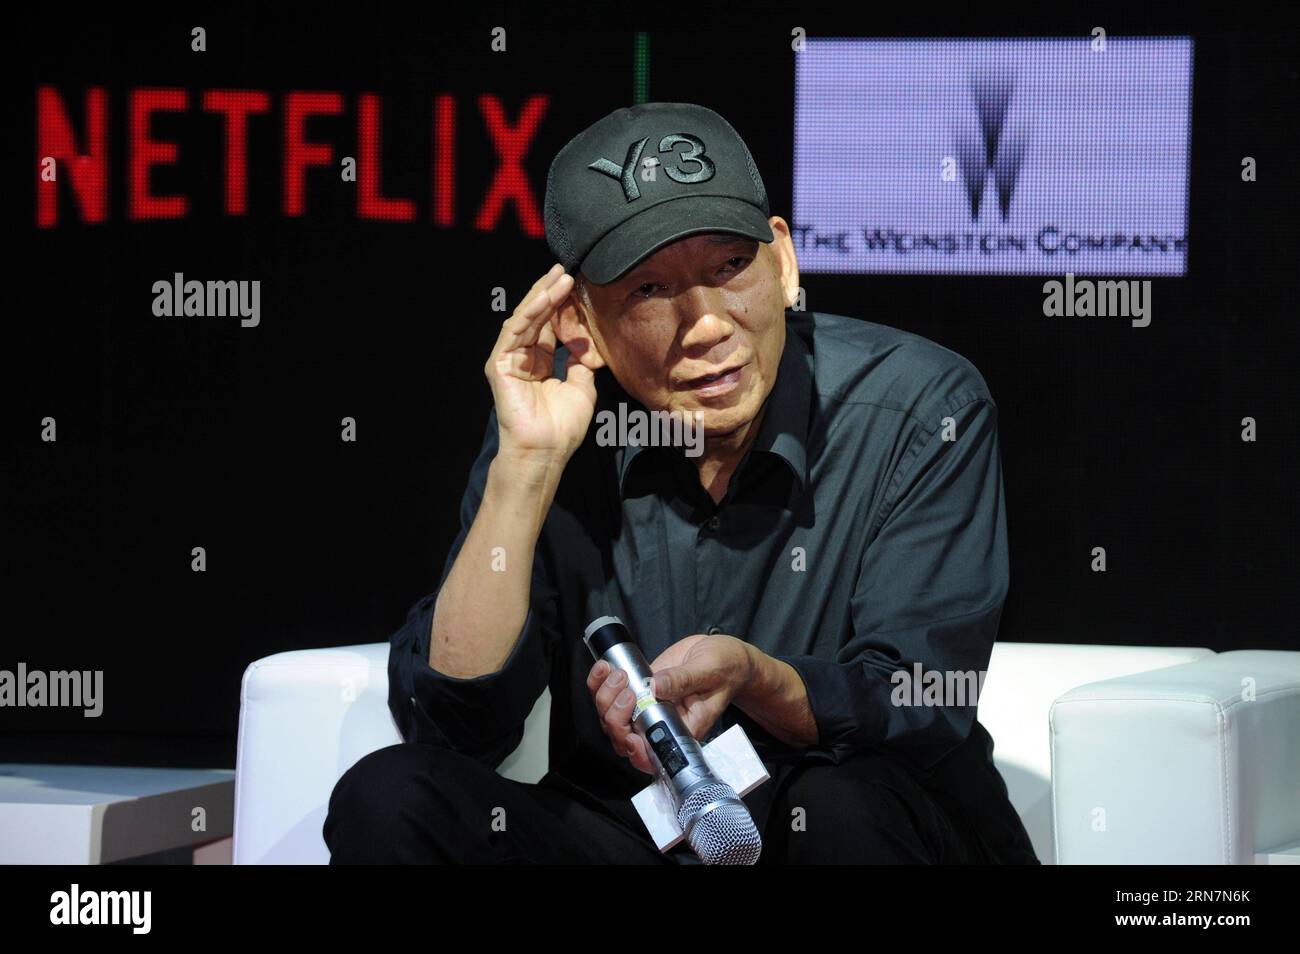 (150914) -- BEIJING, Sept. 14, 2015 -- Director Yuen Woo-ping answers question during a press conference of the film Crouching Tiger Hidden Dragon II in Beijing, capital of China, Sept. 14, 2015. The film will be on show on Feb. 8, 2016 in Chinese mainland. )(mcg) CHINA-BEIJING-FILM CROUCHING TIGER HIDDEN DRAGON II -PRESS CONFERENCE (CN) MaxYan PUBLICATIONxNOTxINxCHN   150914 Beijing Sept 14 2015 Director Yuen Woo Ping Answers Question during a Press Conference of The Film Crouching Tiger Hidden Dragon II in Beijing Capital of China Sept 14 2015 The Film will Be ON Show ON Feb 8 2016 in Chines Stock Photo